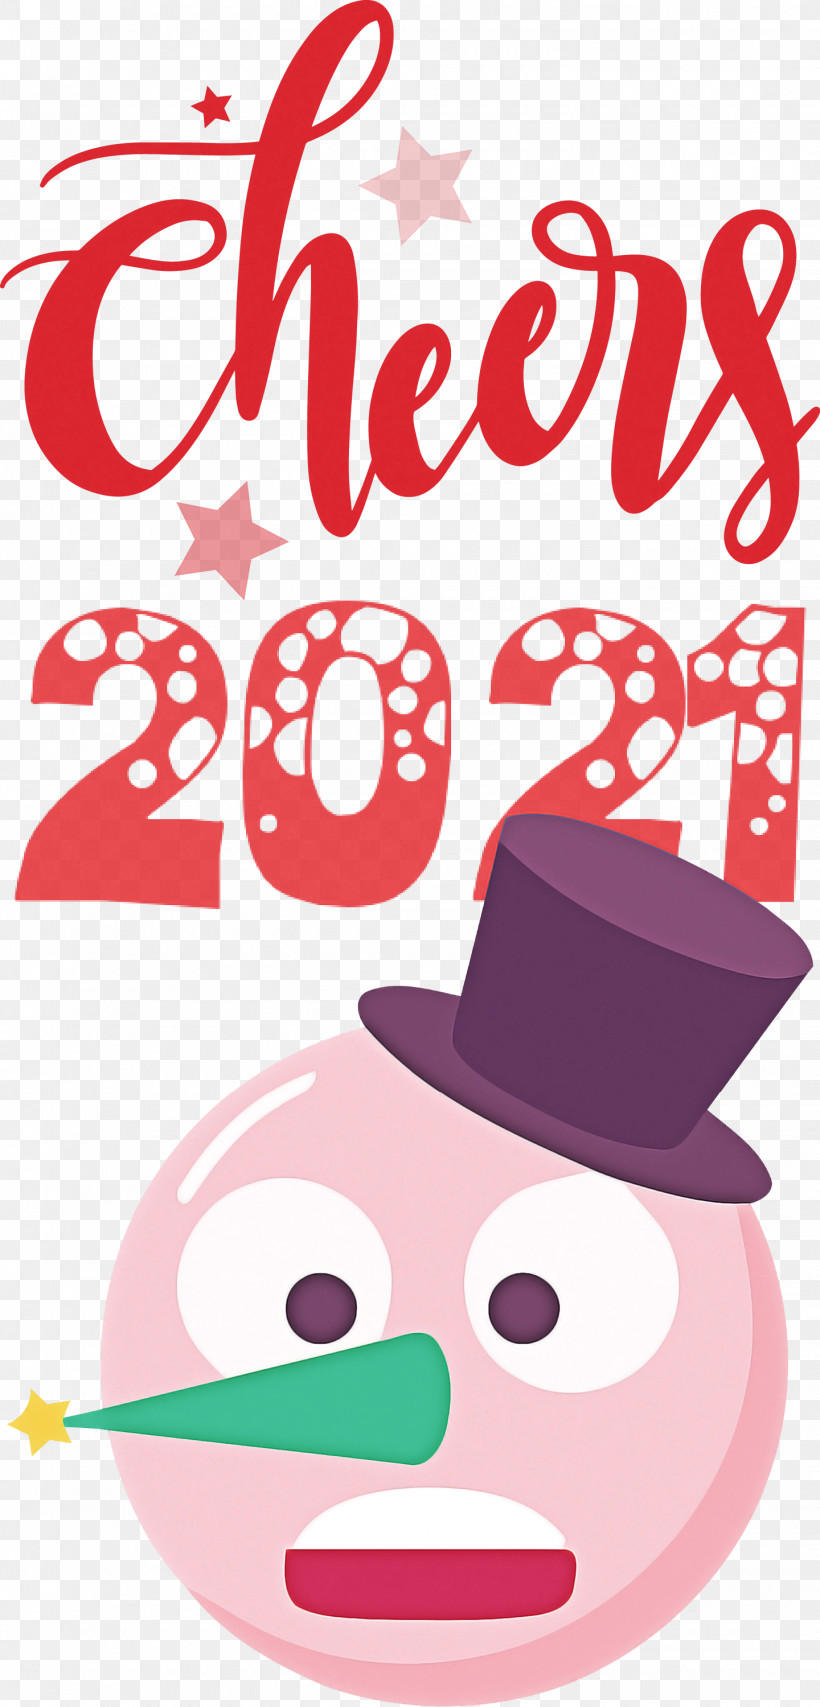 Cheers 2021 New Year Cheers.2021 New Year, PNG, 1440x2999px, Cheers 2021 New Year, Cartoon, Free, Happiness, Silhouette Download Free